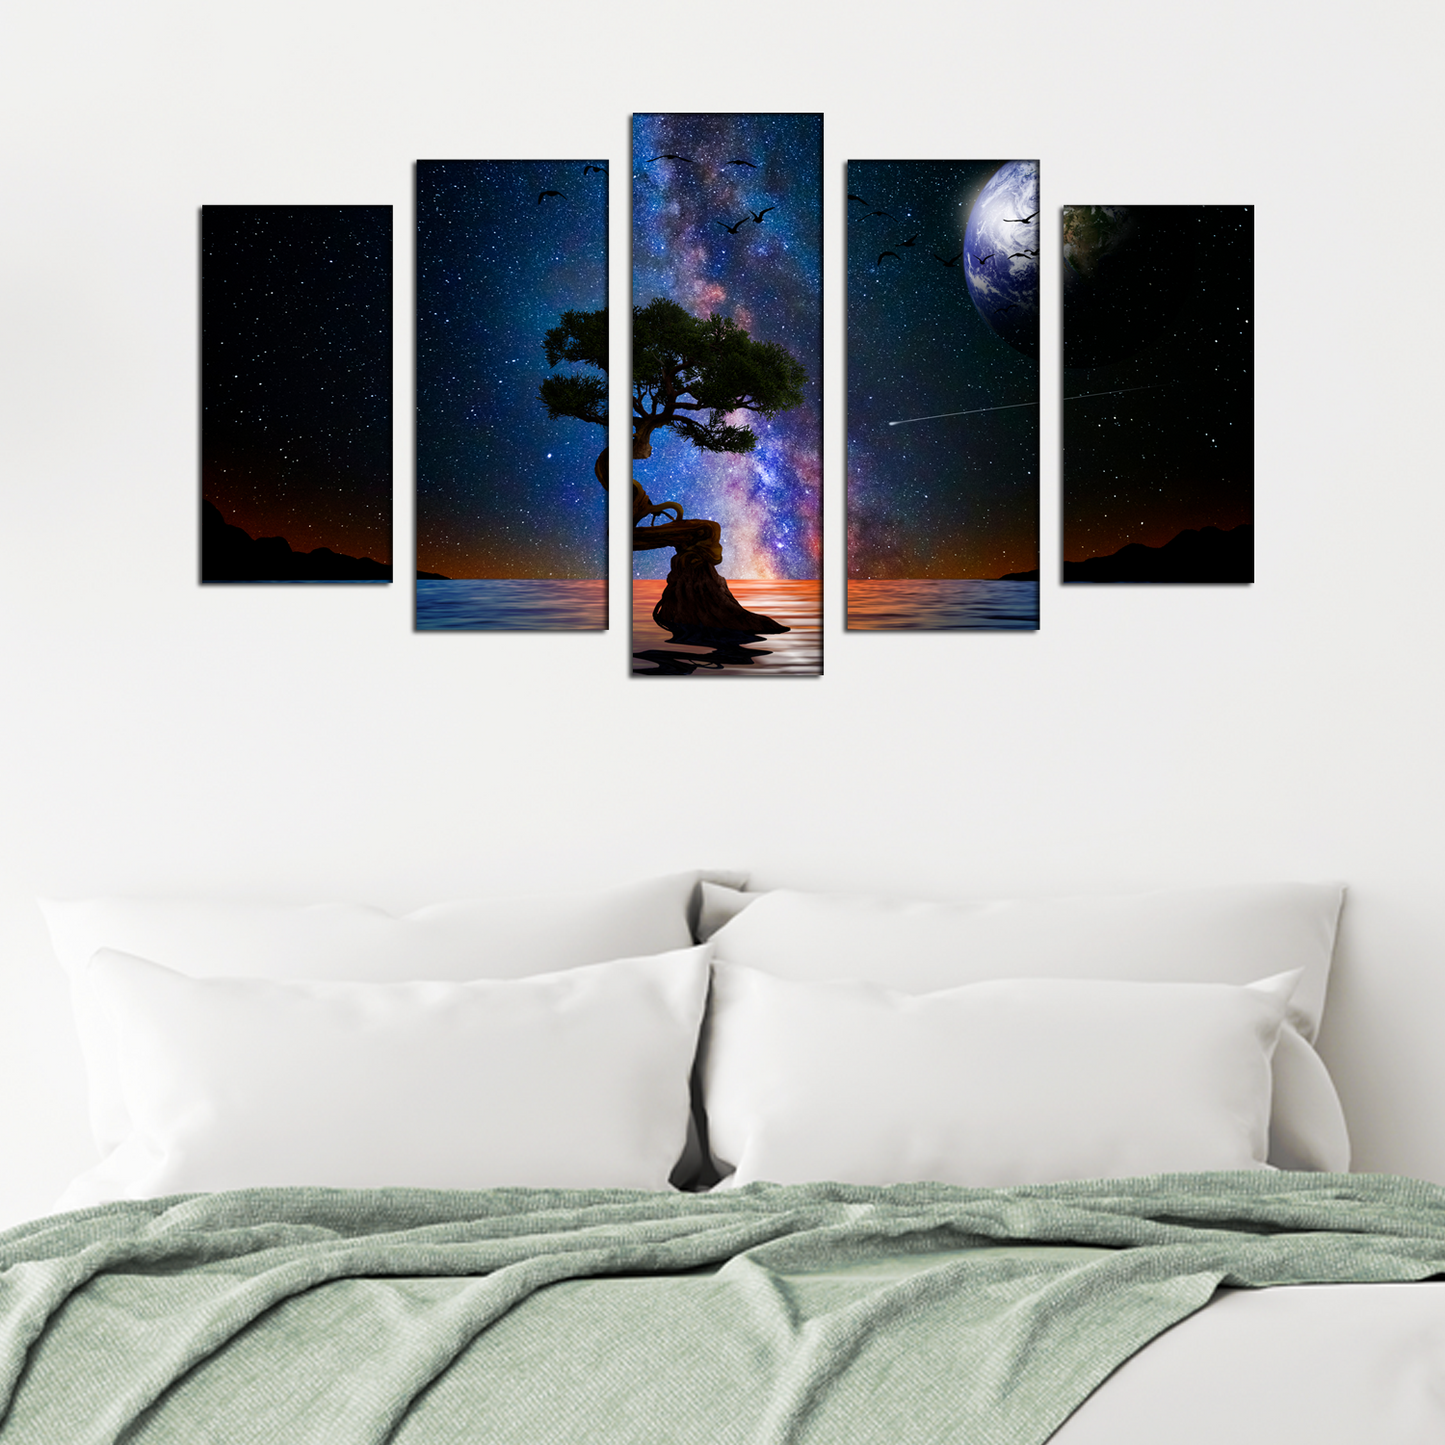 Glittery night lake with tree MDF wall panel painting